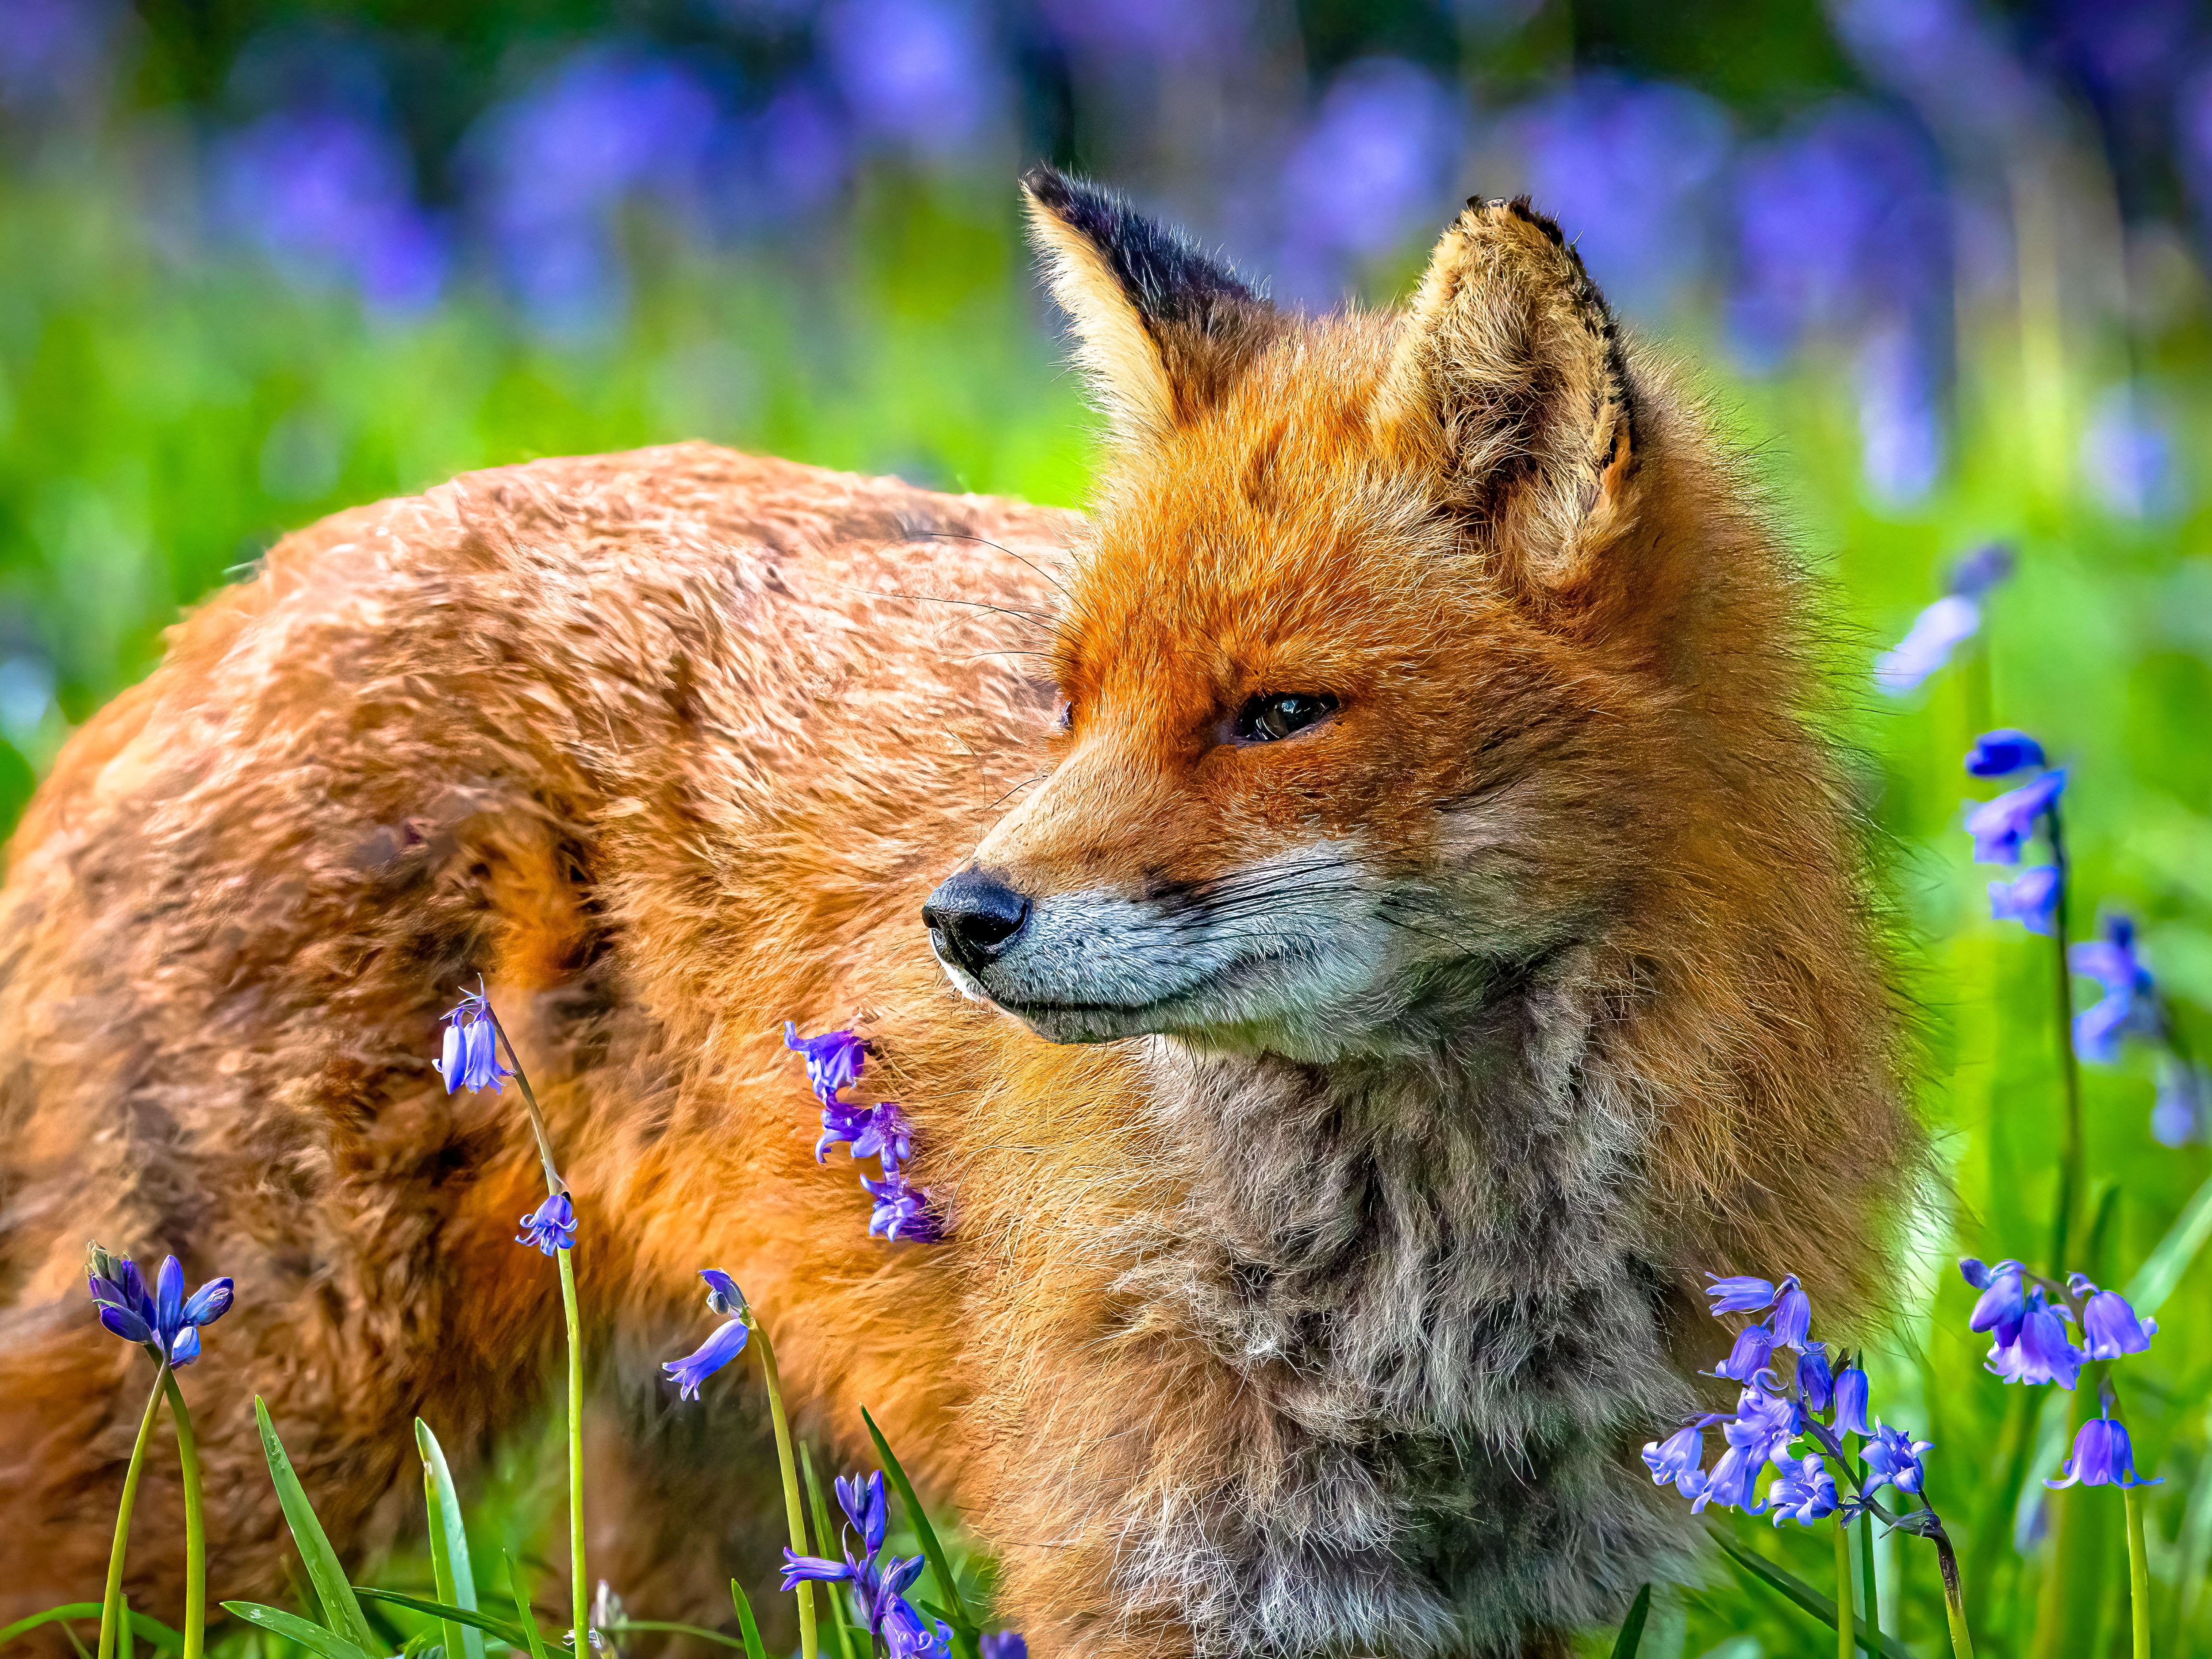 A fox among the bluebells in Bournemouth, Dorset. A 2017 study found that the town had the highest concentration of urban foxes in the UK, with 23 per sq km